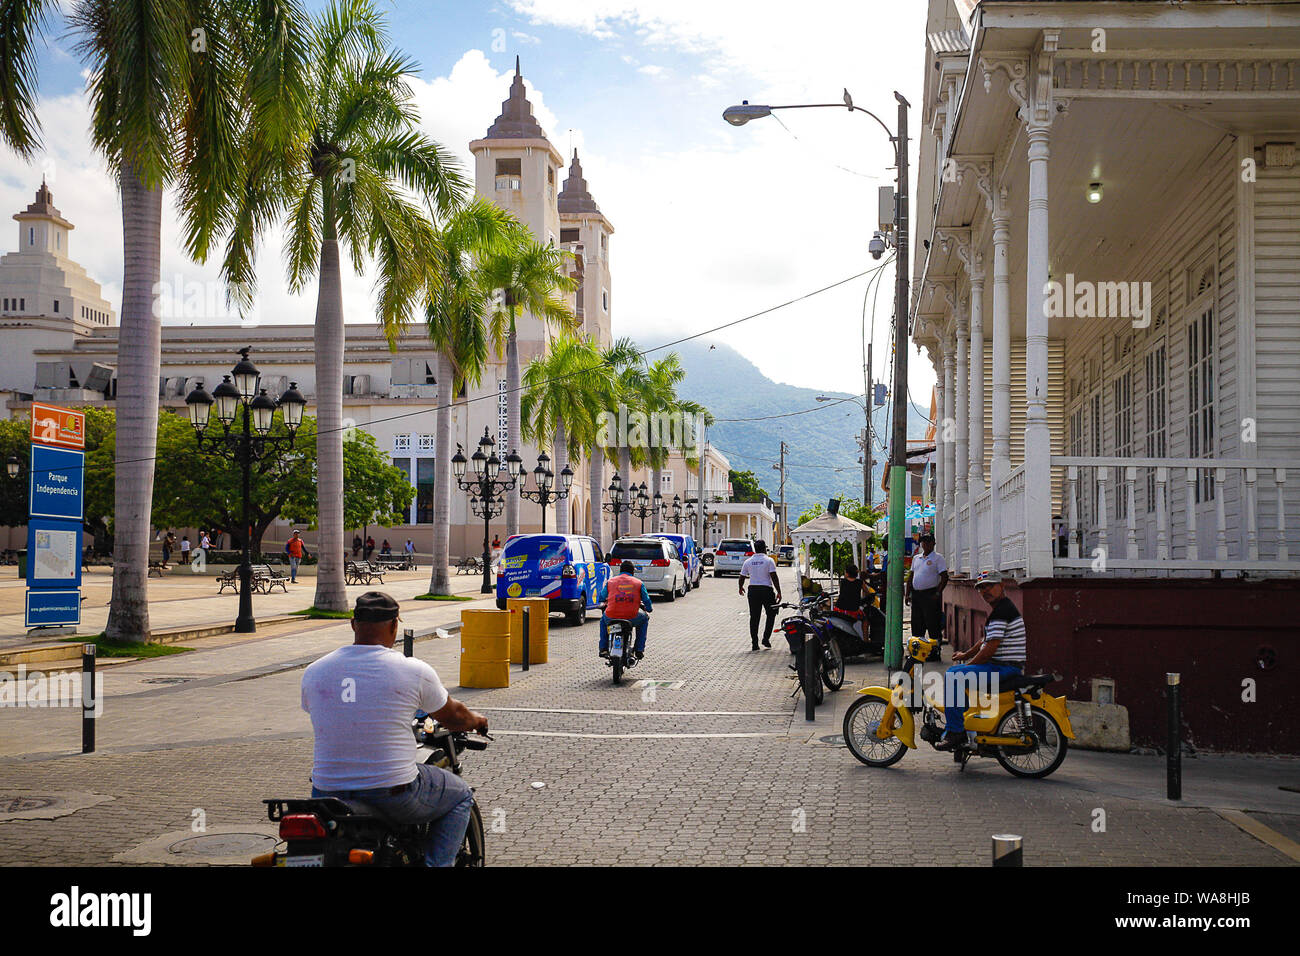 Streets of Puerto Plata with the Catedral de San Felipe in the background Stock Photo